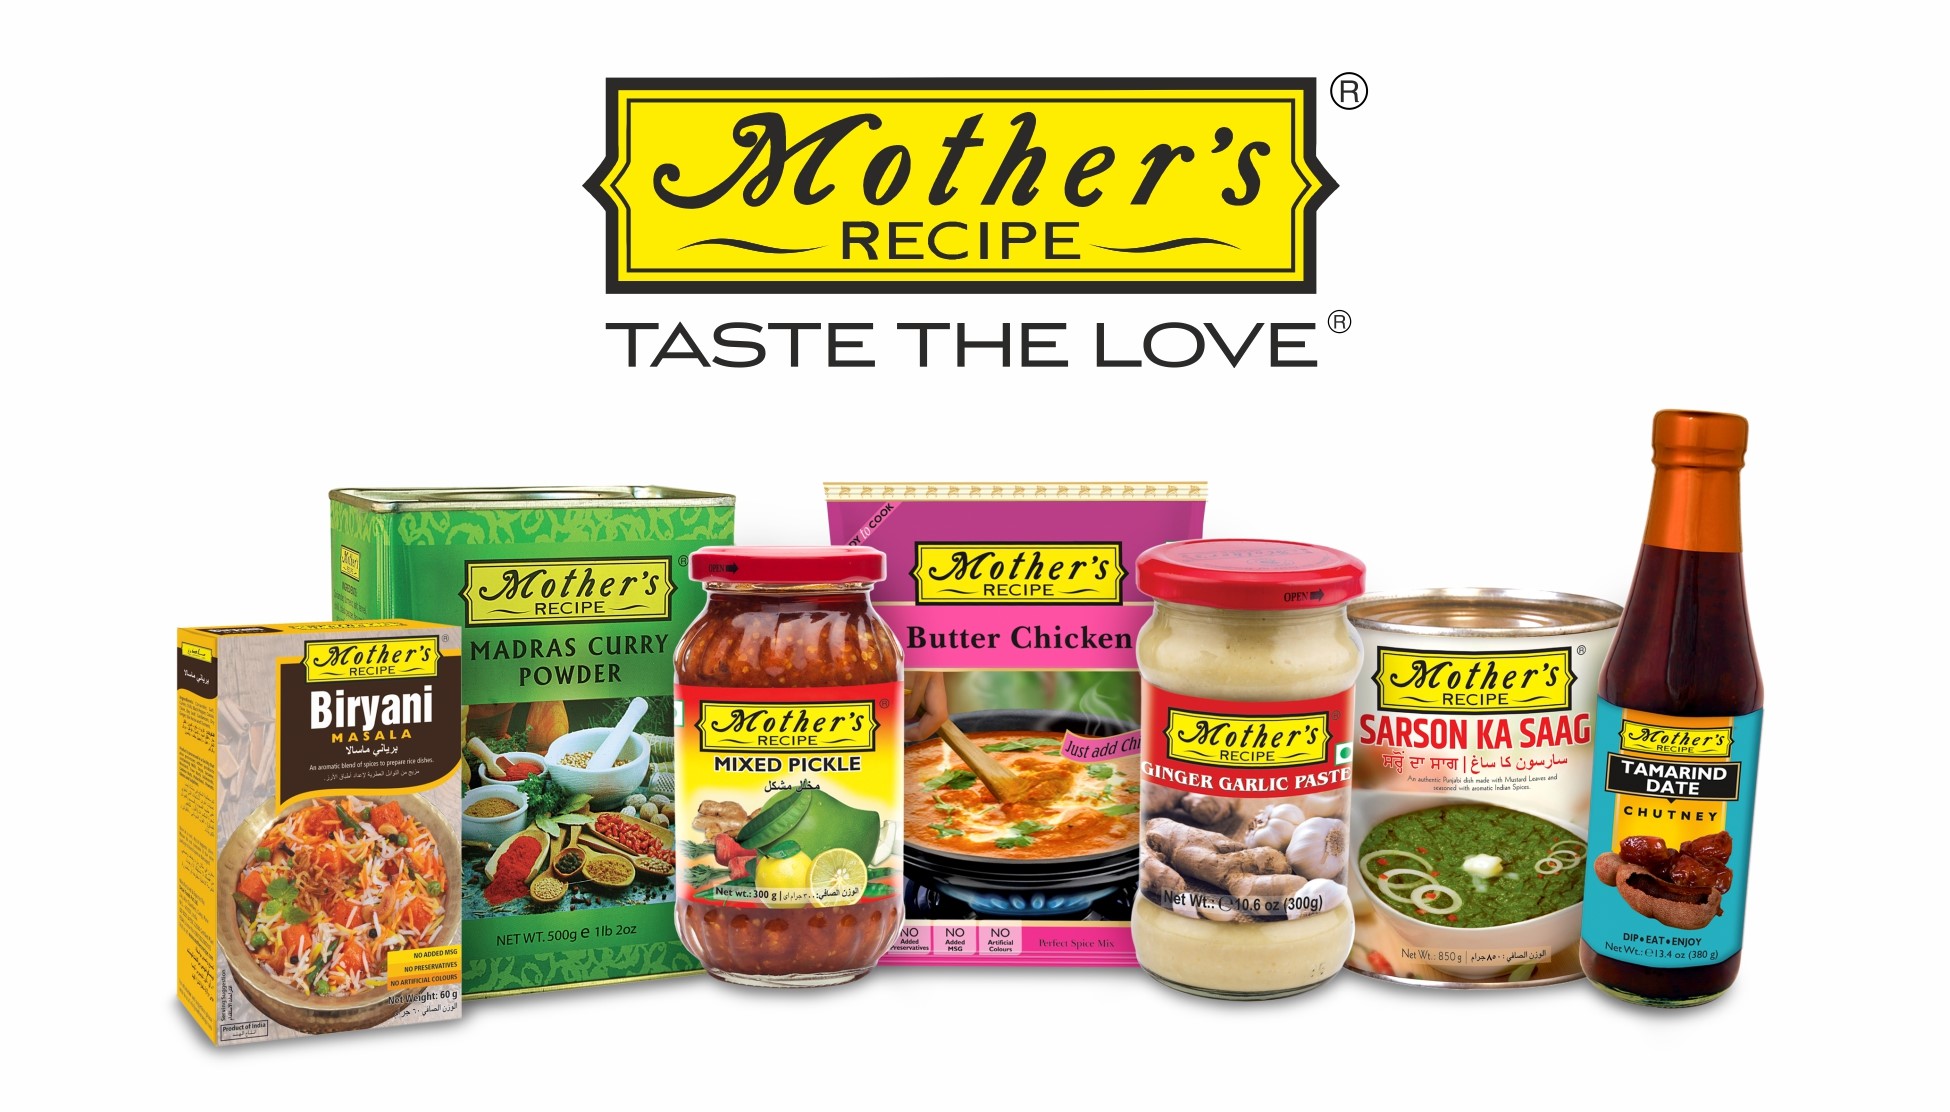 Mother’s Recipe makes its presence felt at the Indian Pavilion at Expo2020 Dubai decoding=